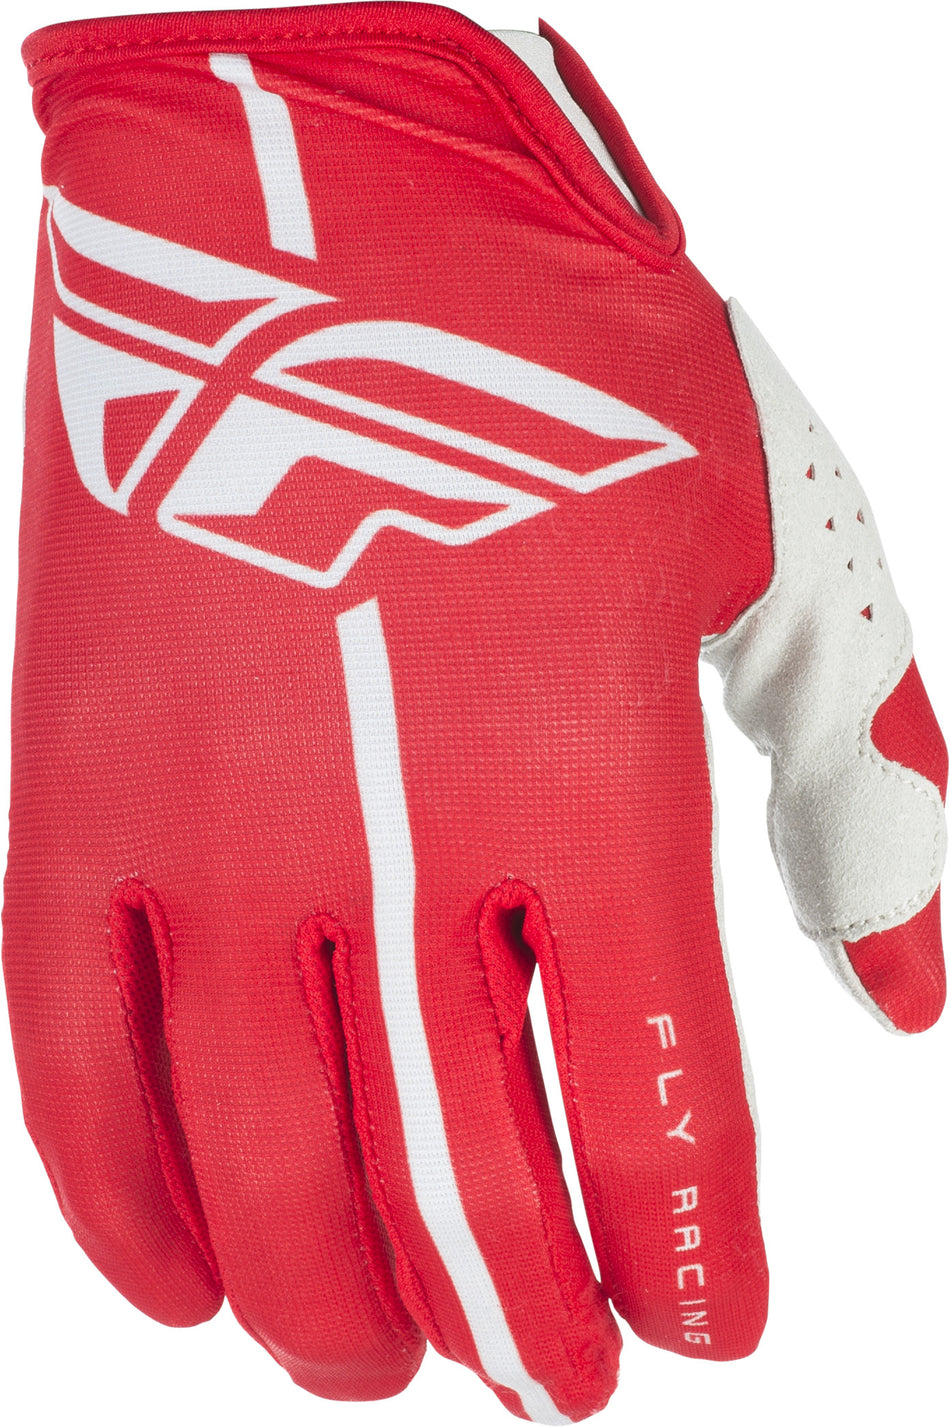 FLY RACING Lite Gloves Red/Grey Sz 8 371-01208